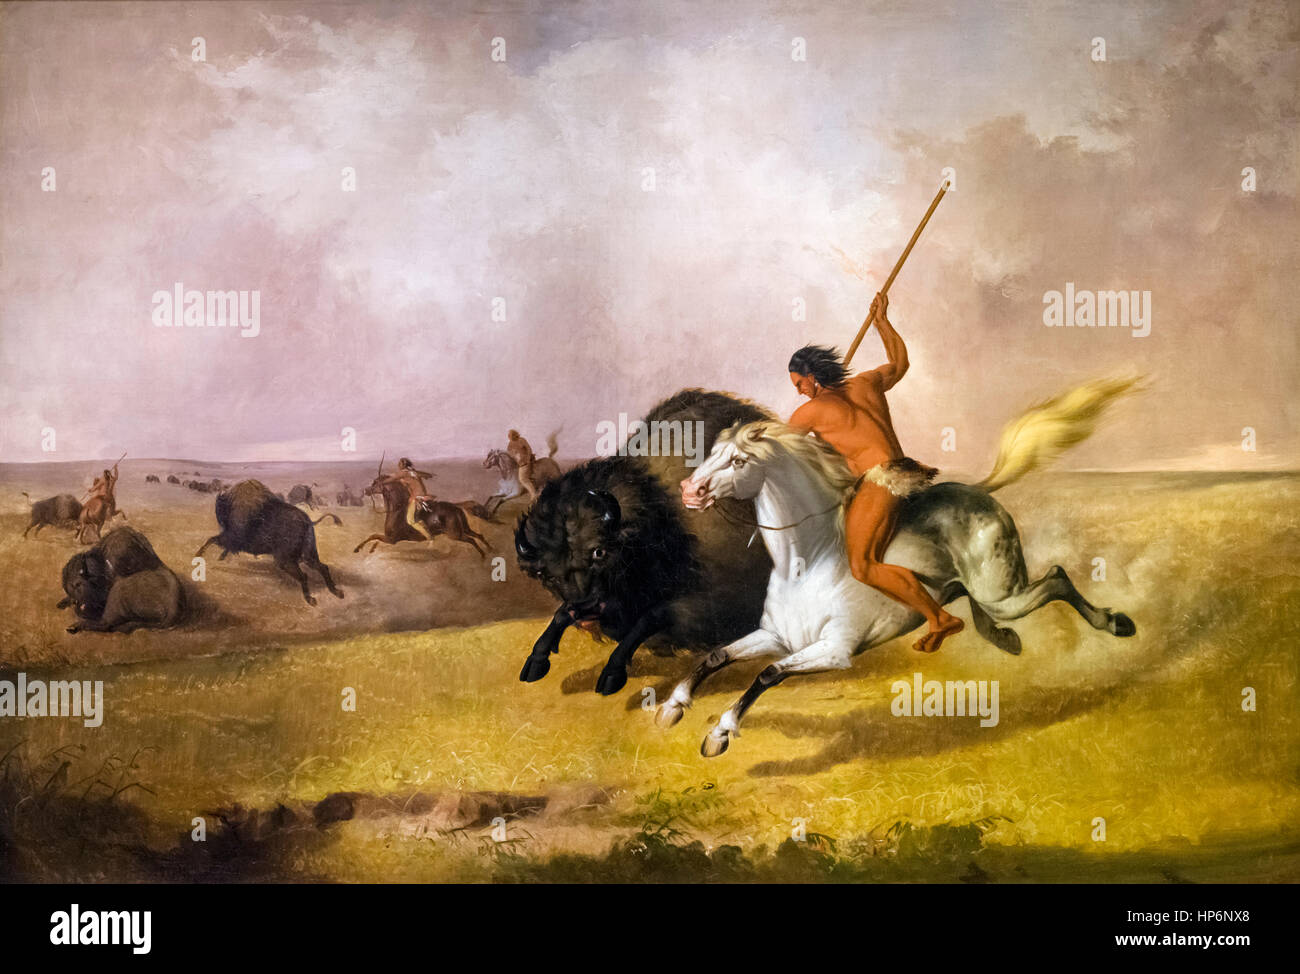 Buffalo Hunt on the Southwestern Prairies by John Mix Stanley, oil on canvas, 1845. The painting shows an American Indian brave spearing a buffalo. Stock Photo